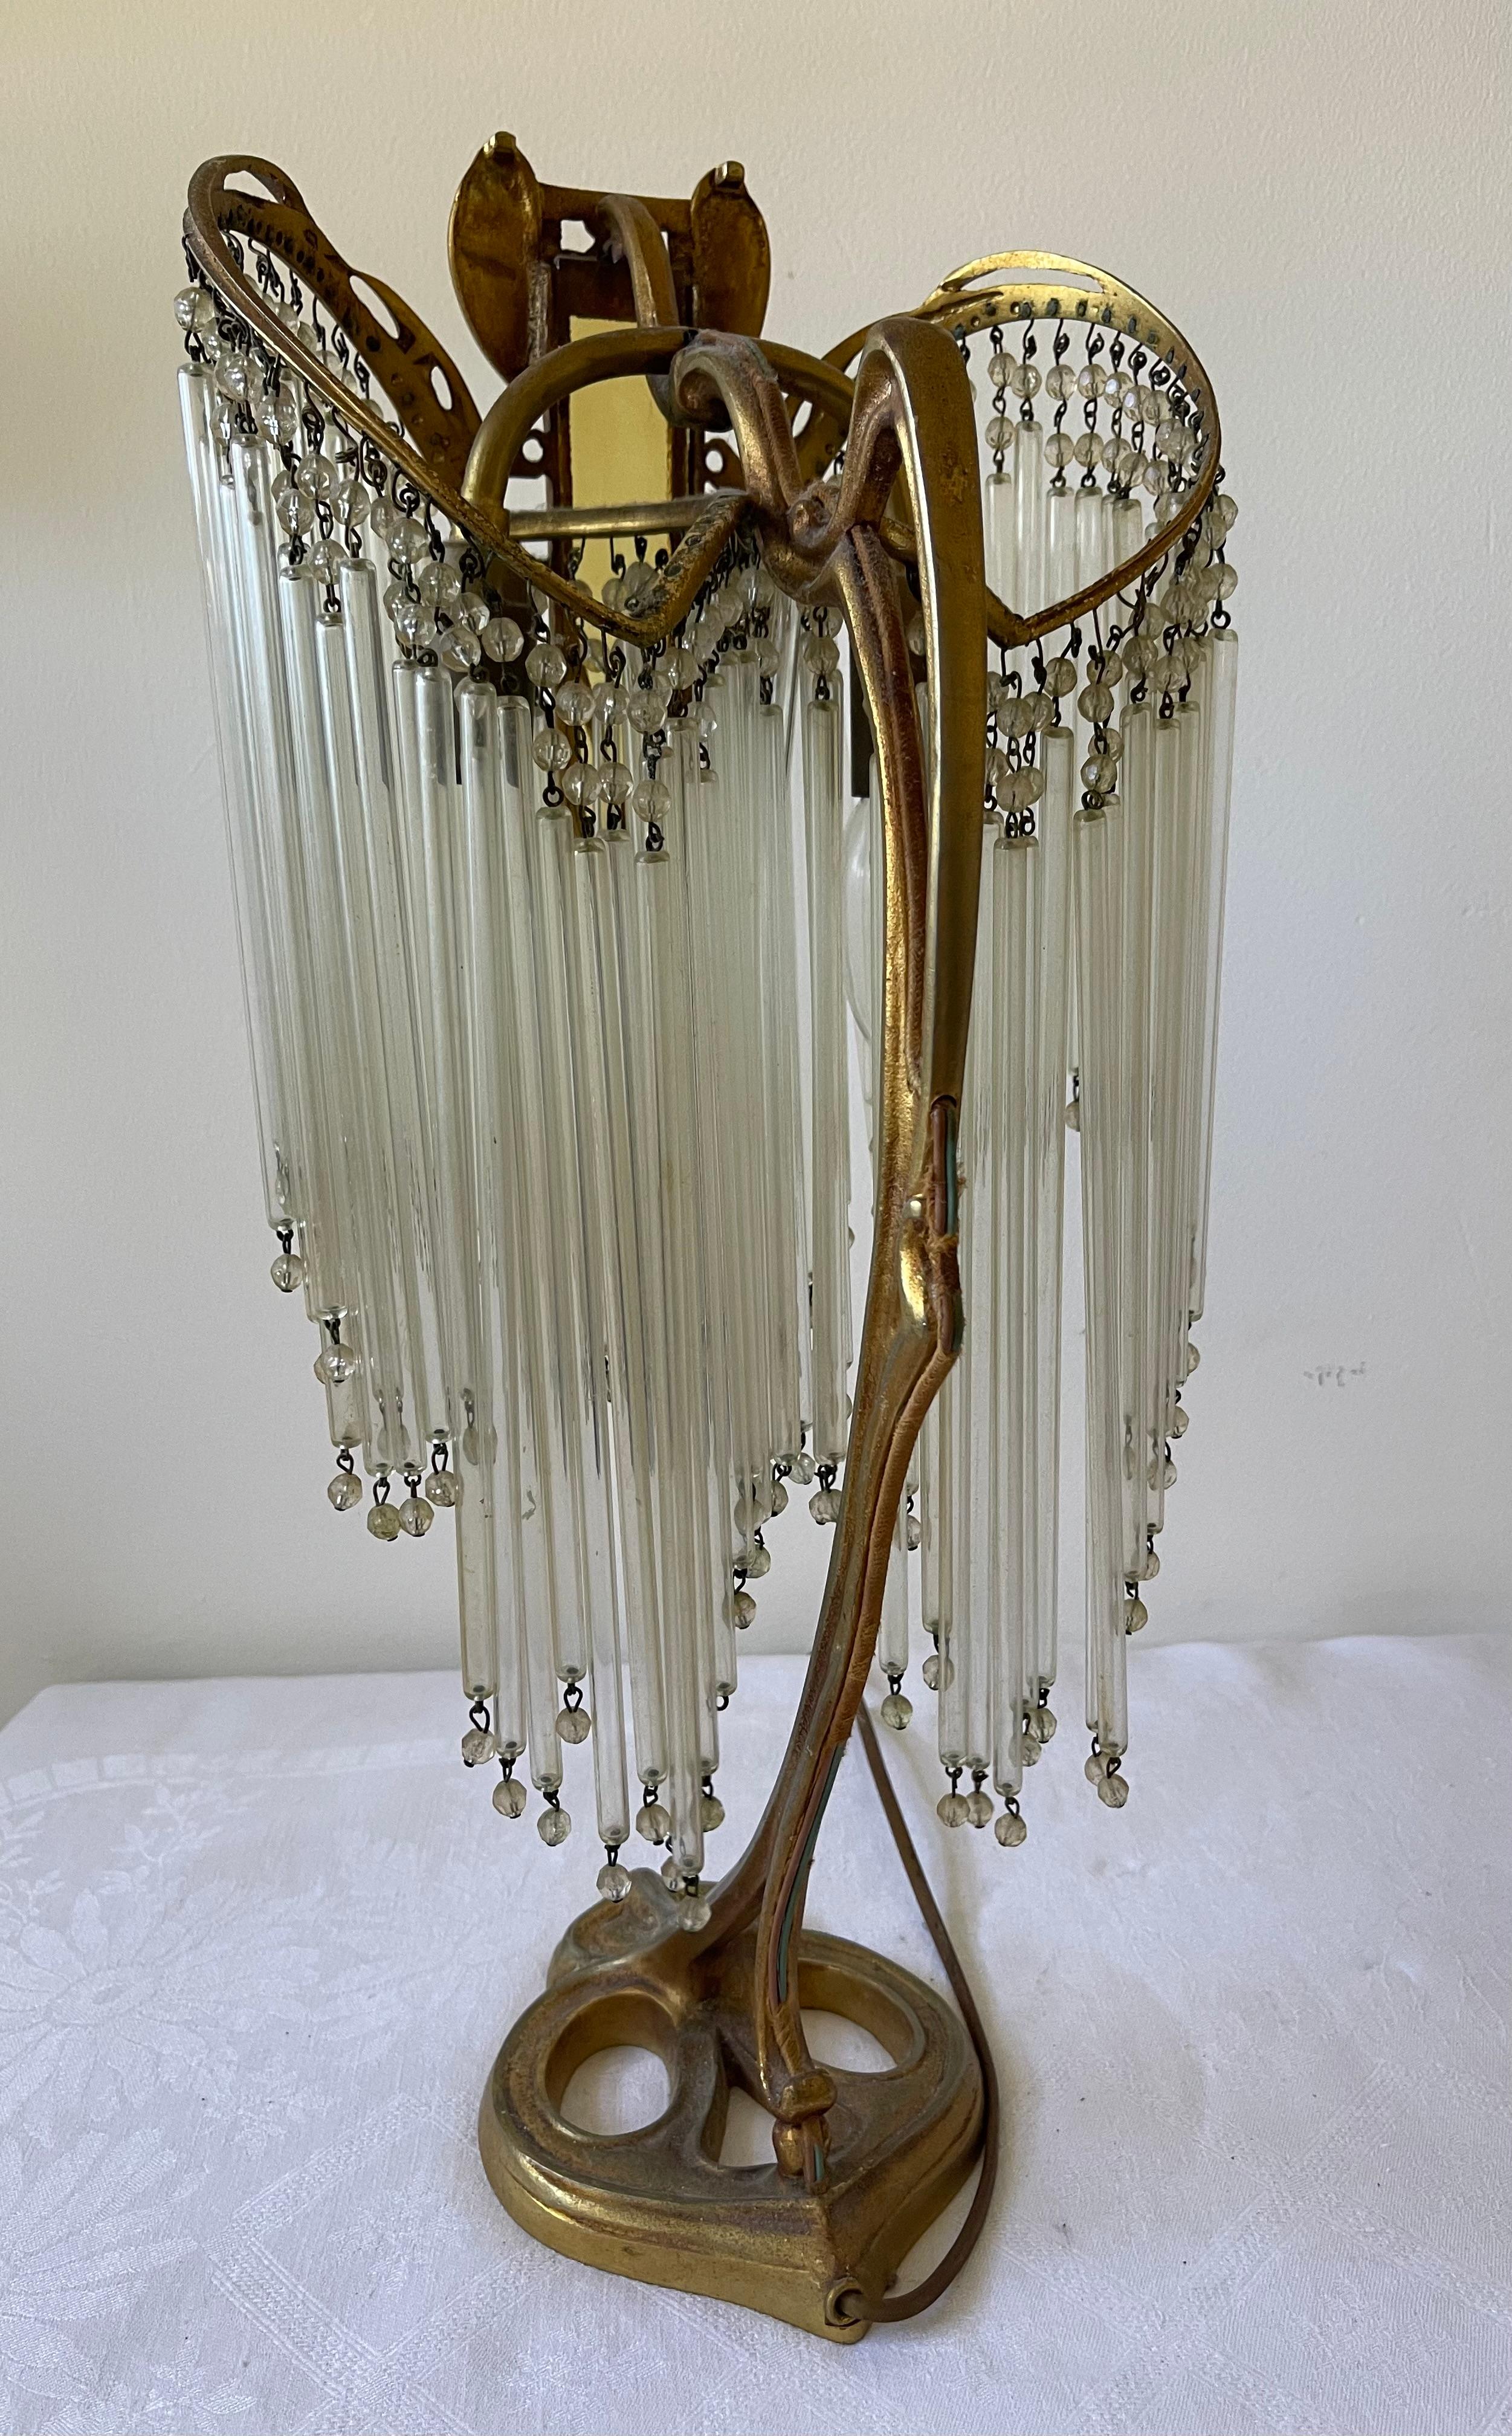 Art Nouveau style table lamp in bronze and glass paste.
In the Hector Guimard style, this so-called butterfly lamp is totally inspired by the art nouveau period.
Its very decorative style gives a very feminine and poetic atmosphere. This table